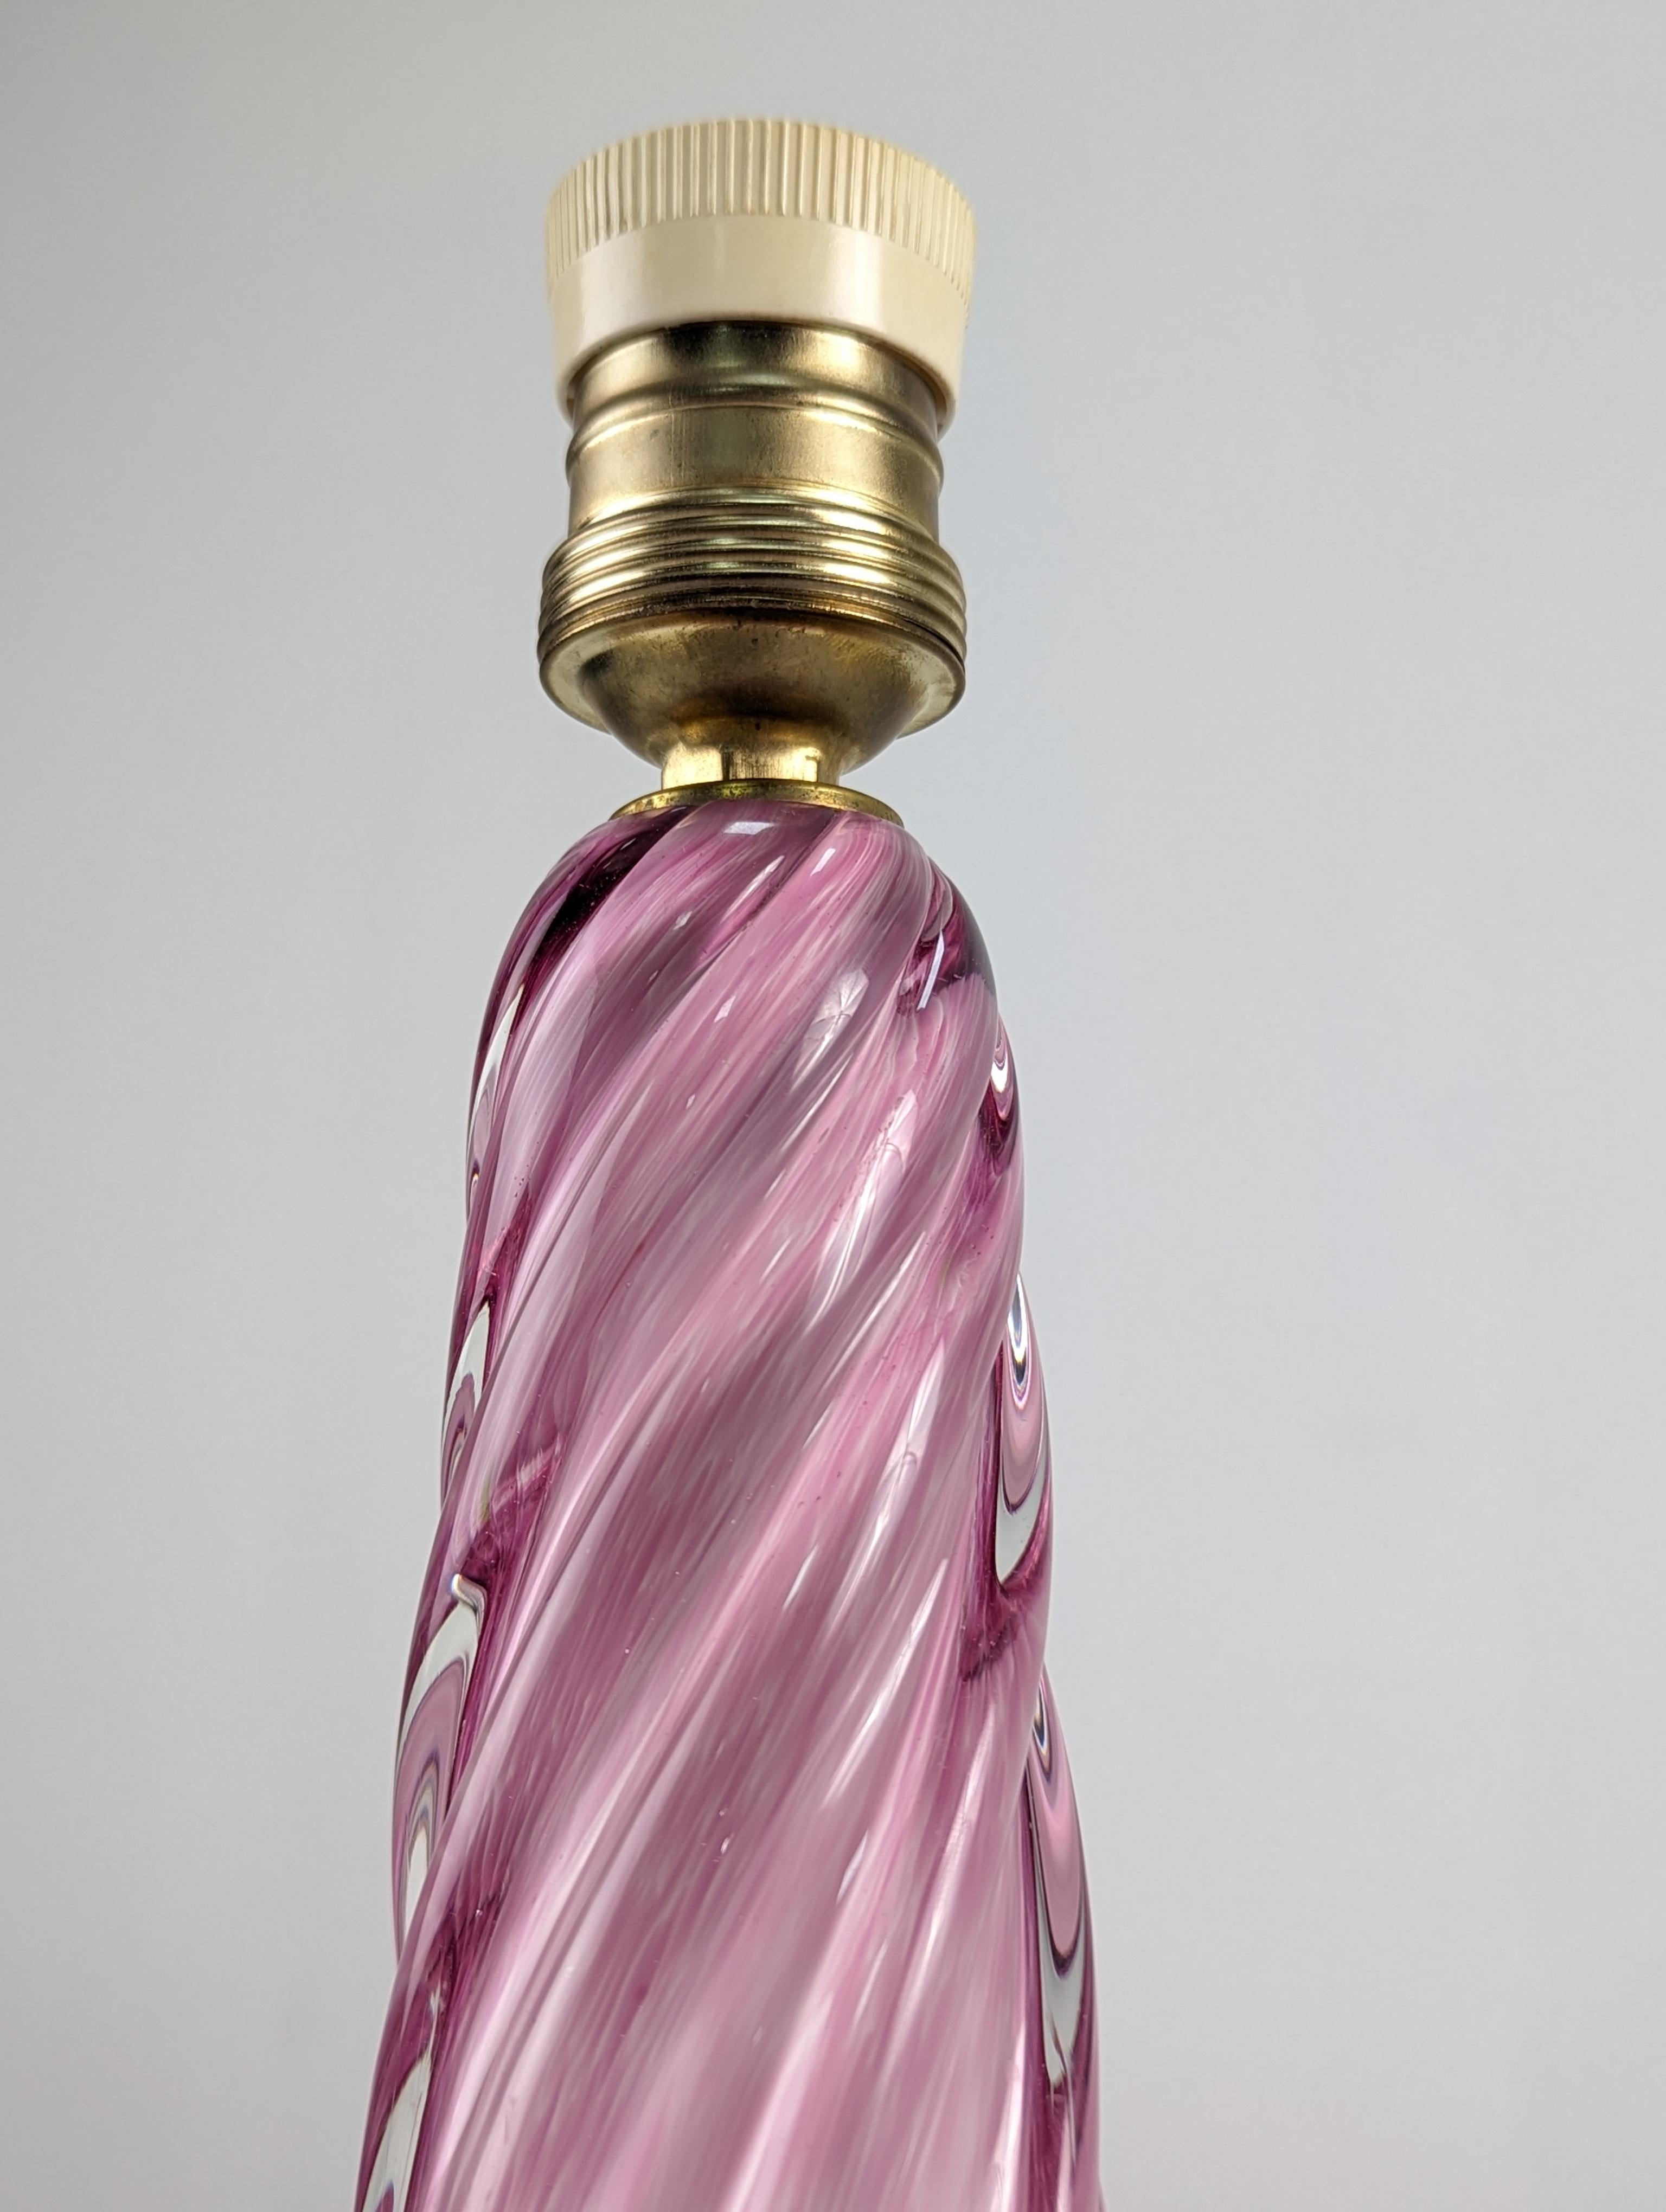 Beautiful spiral Murano glass lamp from the 60s attributed to Seguso Vetri d'Arte in a beautiful pink color with a water effect inside. An extraordinarily elegant lamp that will delight any room and decoration.